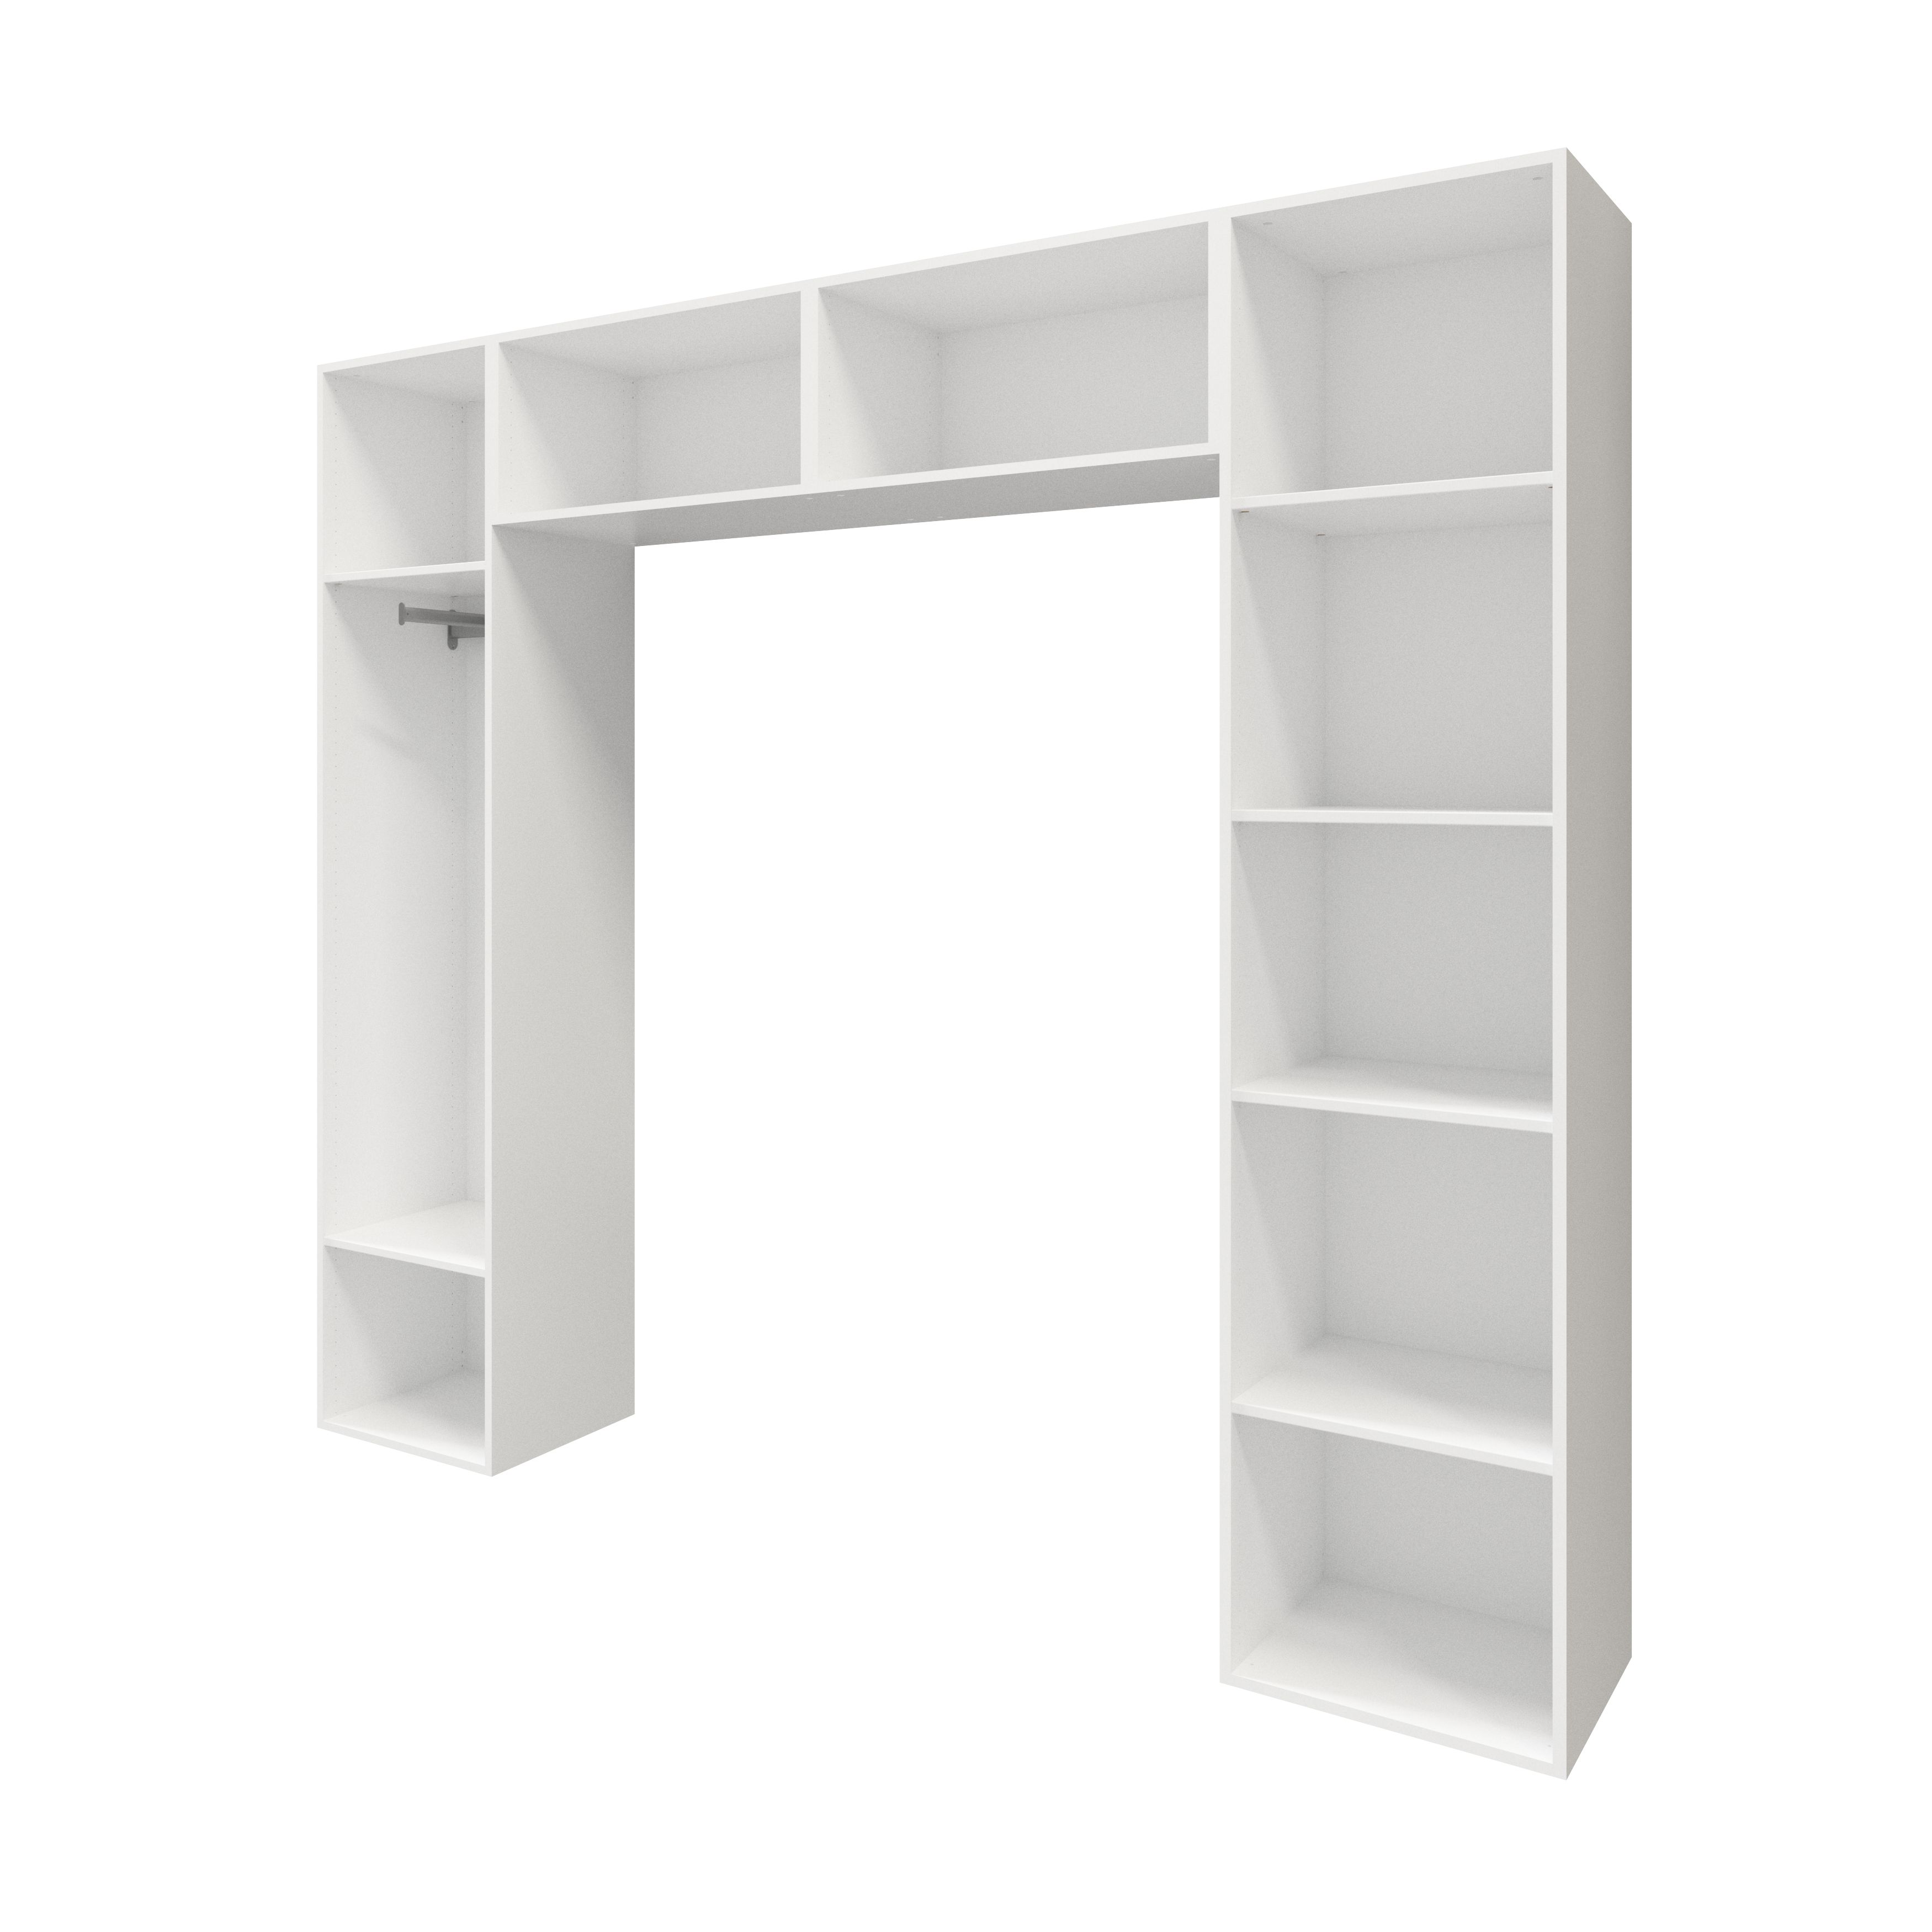 GoodHome Atomia White Door, White Overhead unit (H)2250mm (W)2500mm (D)450mm